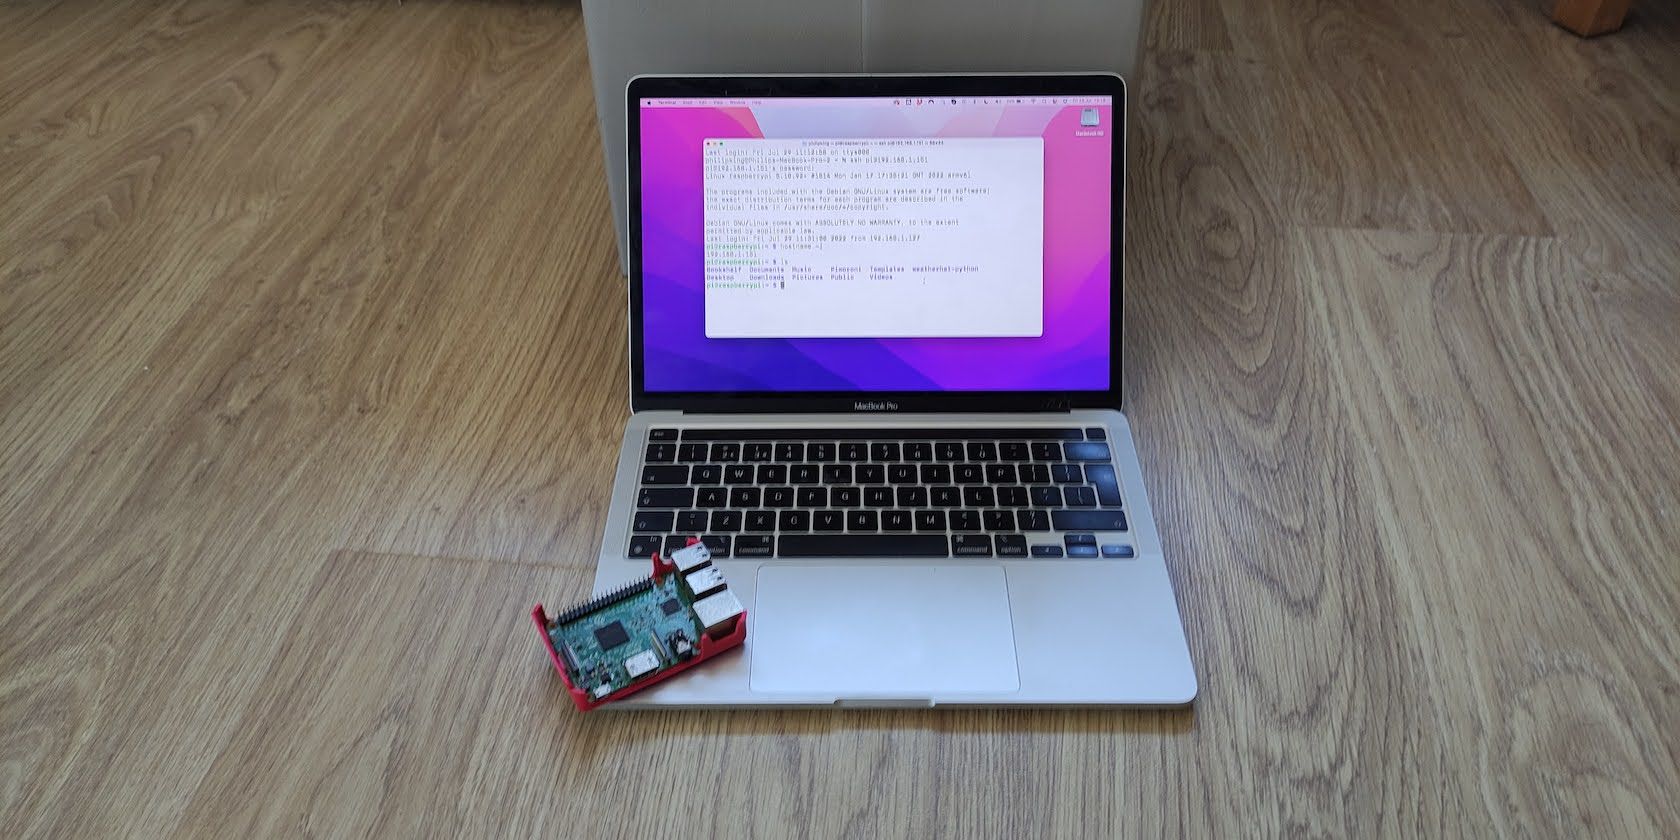 SSHing into a Raspberry Pi for Remote Access